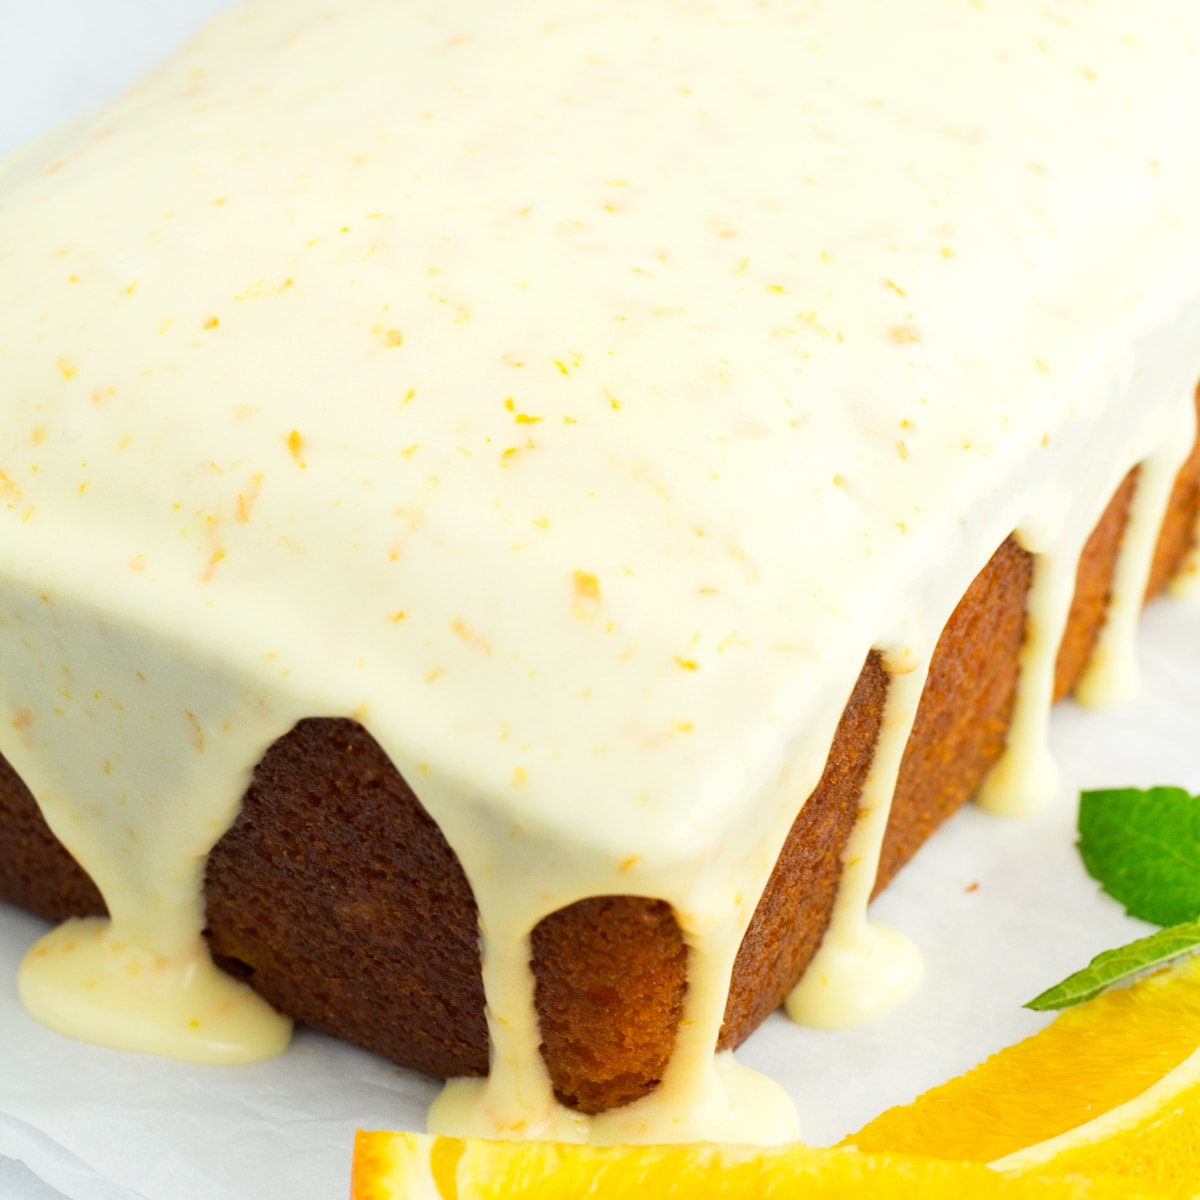 Moist Vanilla Pound Cake Recipe With Cream Cheese Frosting - Back To My  Southern Roots